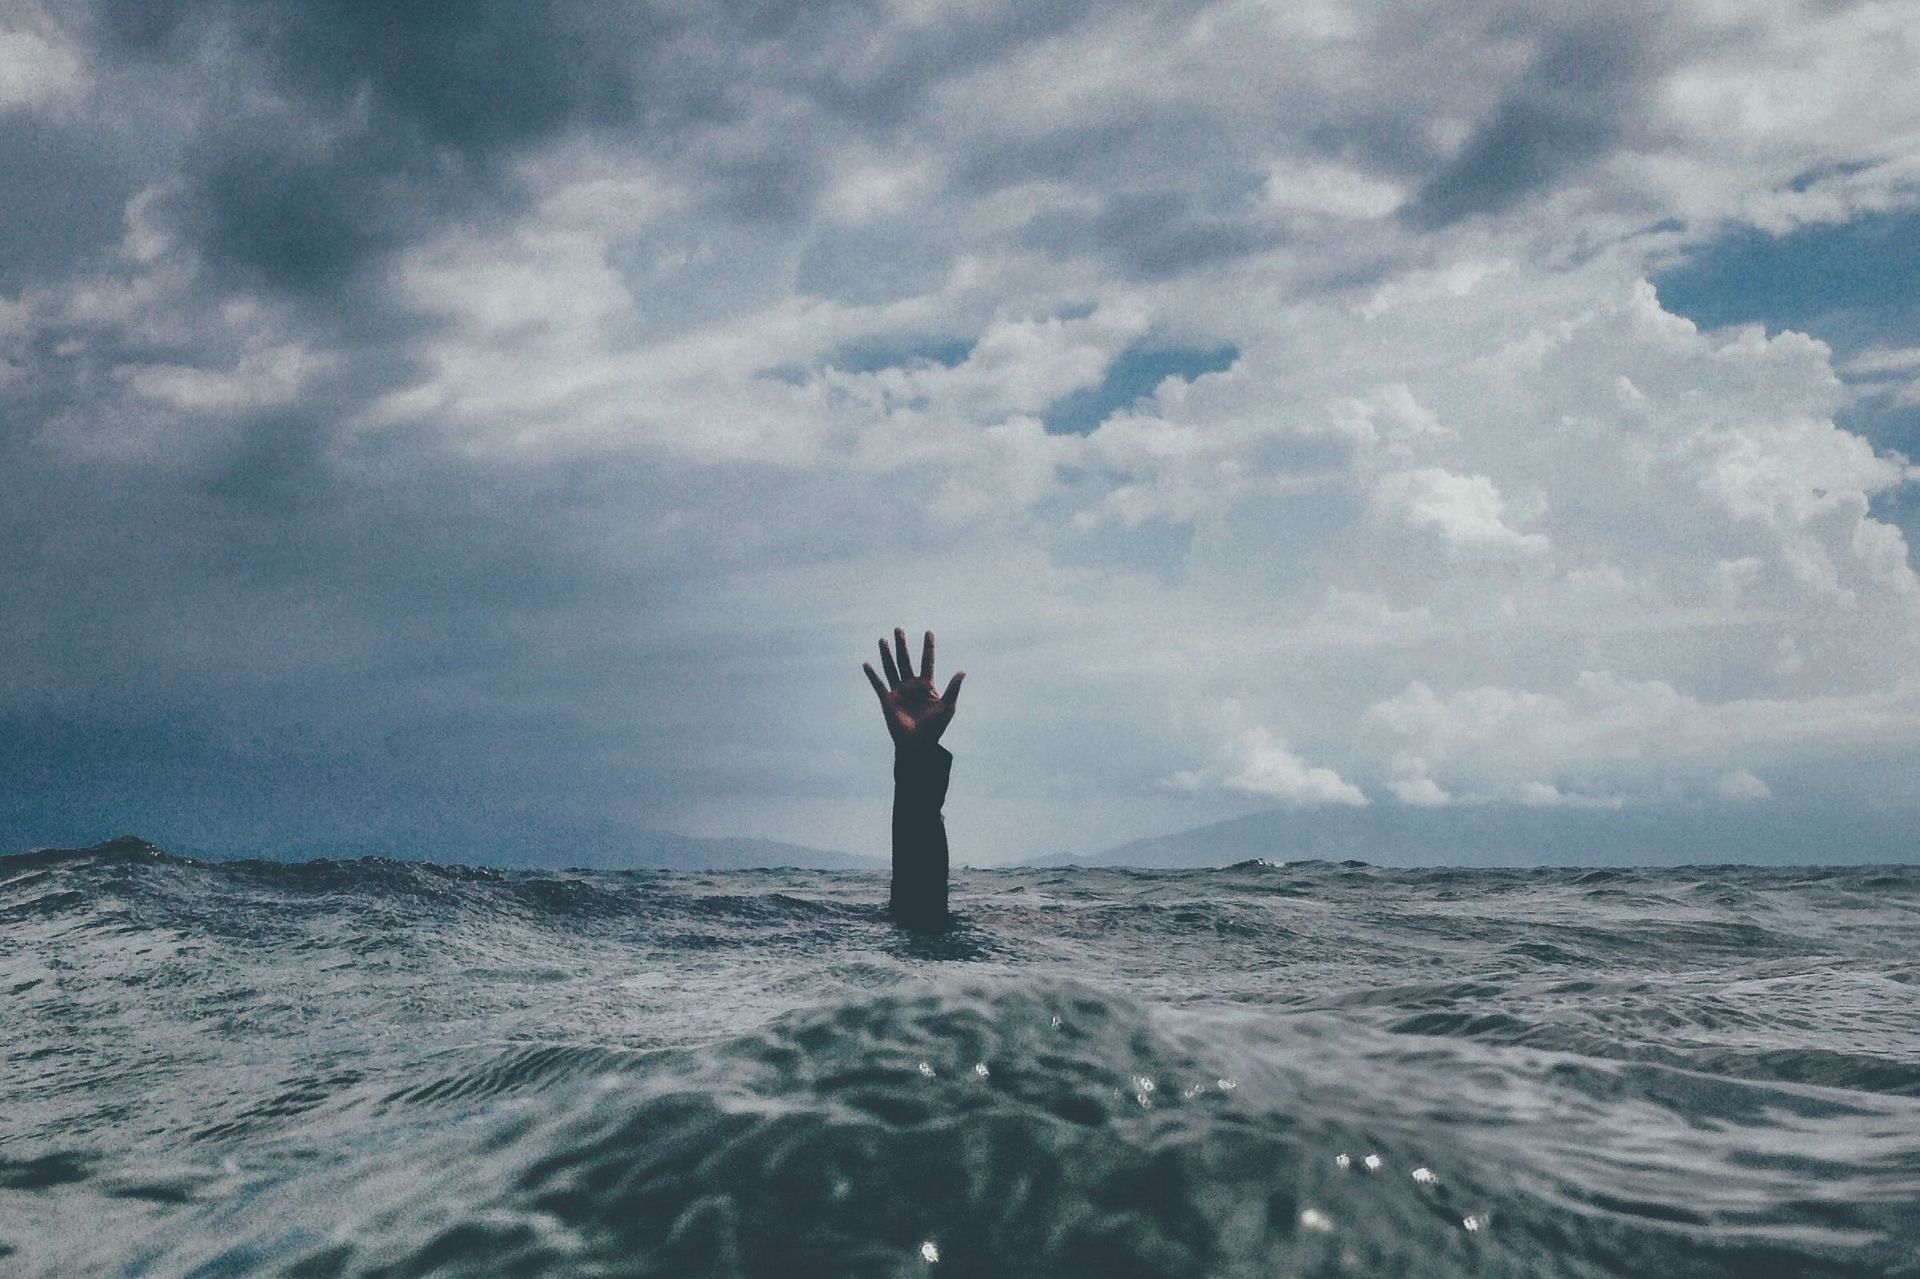 A depressive episode can feel like drowning, but rescue is possible. (Photo via Unsplash/ Nikko Macaspac)